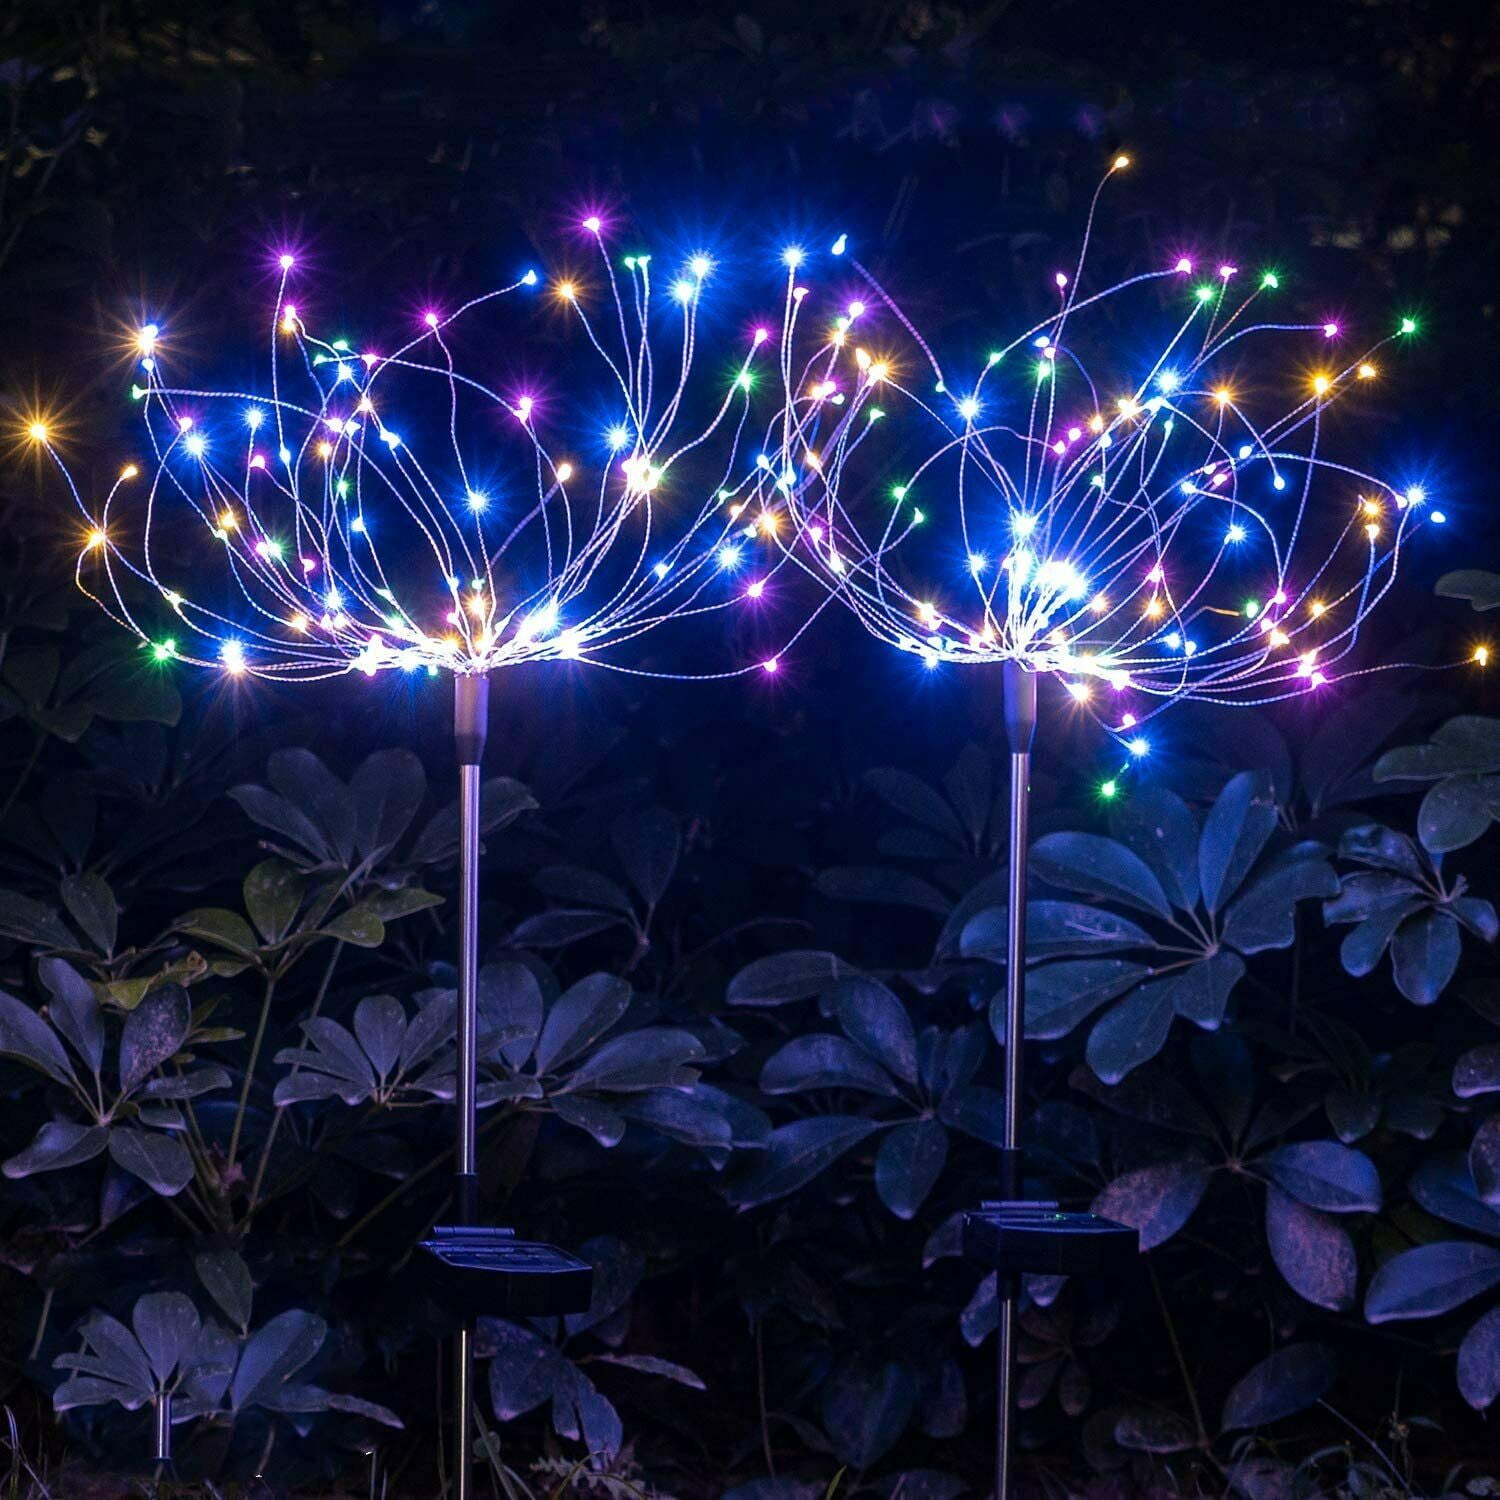 Warm White 2 Pack DIY Flowers Fireworks Stars for Walkway Pathway Backyard Christmas Party Decor Solar Firework Lights 105 LED-Powered 35 Copper Wires Amashop Outdoor-Garden-Decorative-Lights